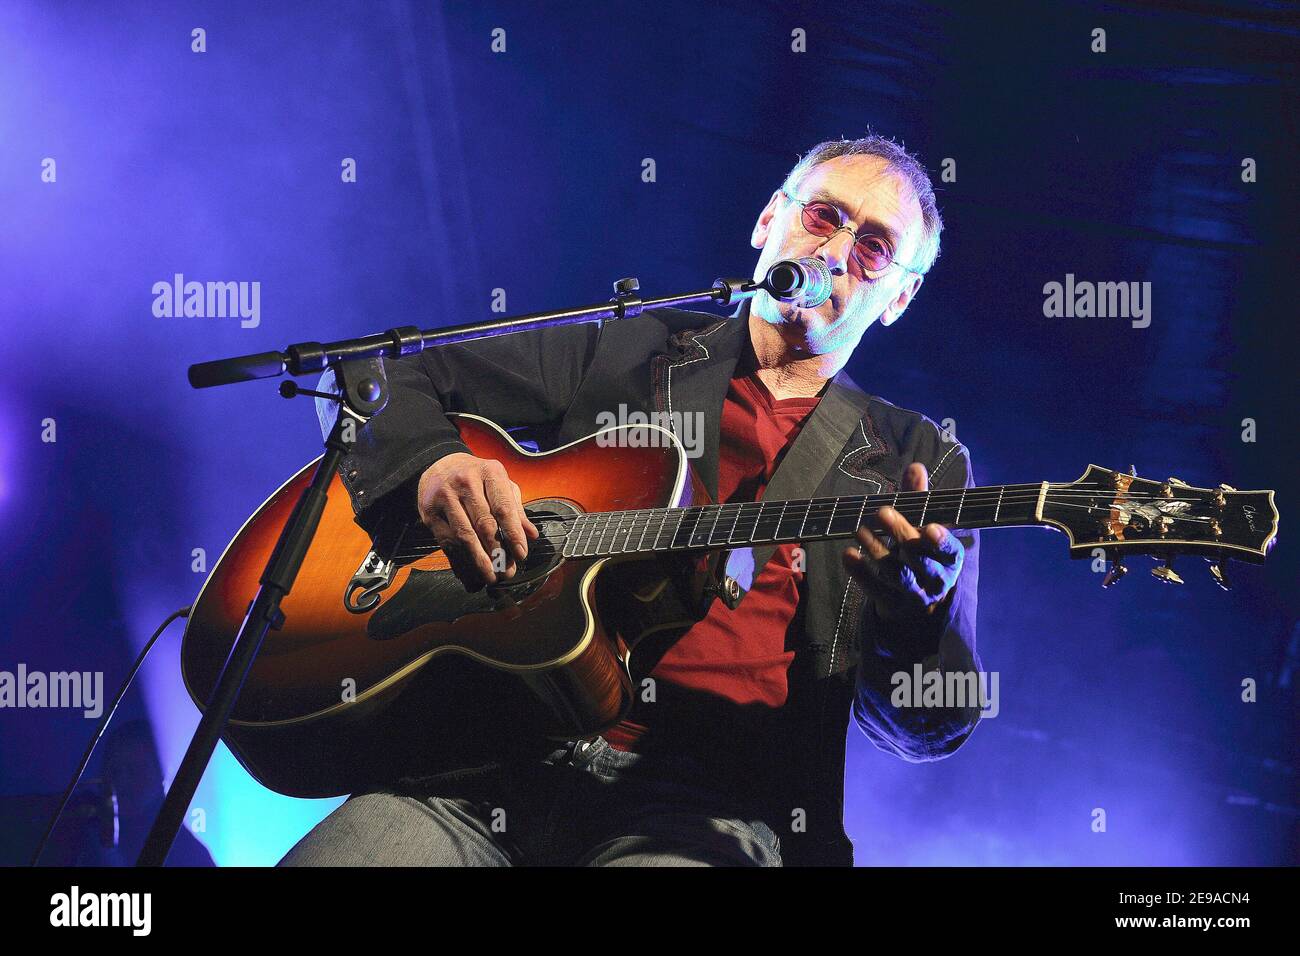 Singer and guitarist Michael Jones performs the live concert 'Around the guitar' held at the 'Hotel de Ville' in Paris, France, on May 20, 2006. 'U.E.J.F', 'Ni Putes Ni Soumises', 'SOS-RACISME', 'Coordination des Berberes de France', 'Amities Judeo-Chretiennes', 'Amitie Judeo-Noire' associations want to organize each year a 'Spring for Human Rights' in France. Photo by Edouard Bernaux/ABACAPRESS.COM Stock Photo